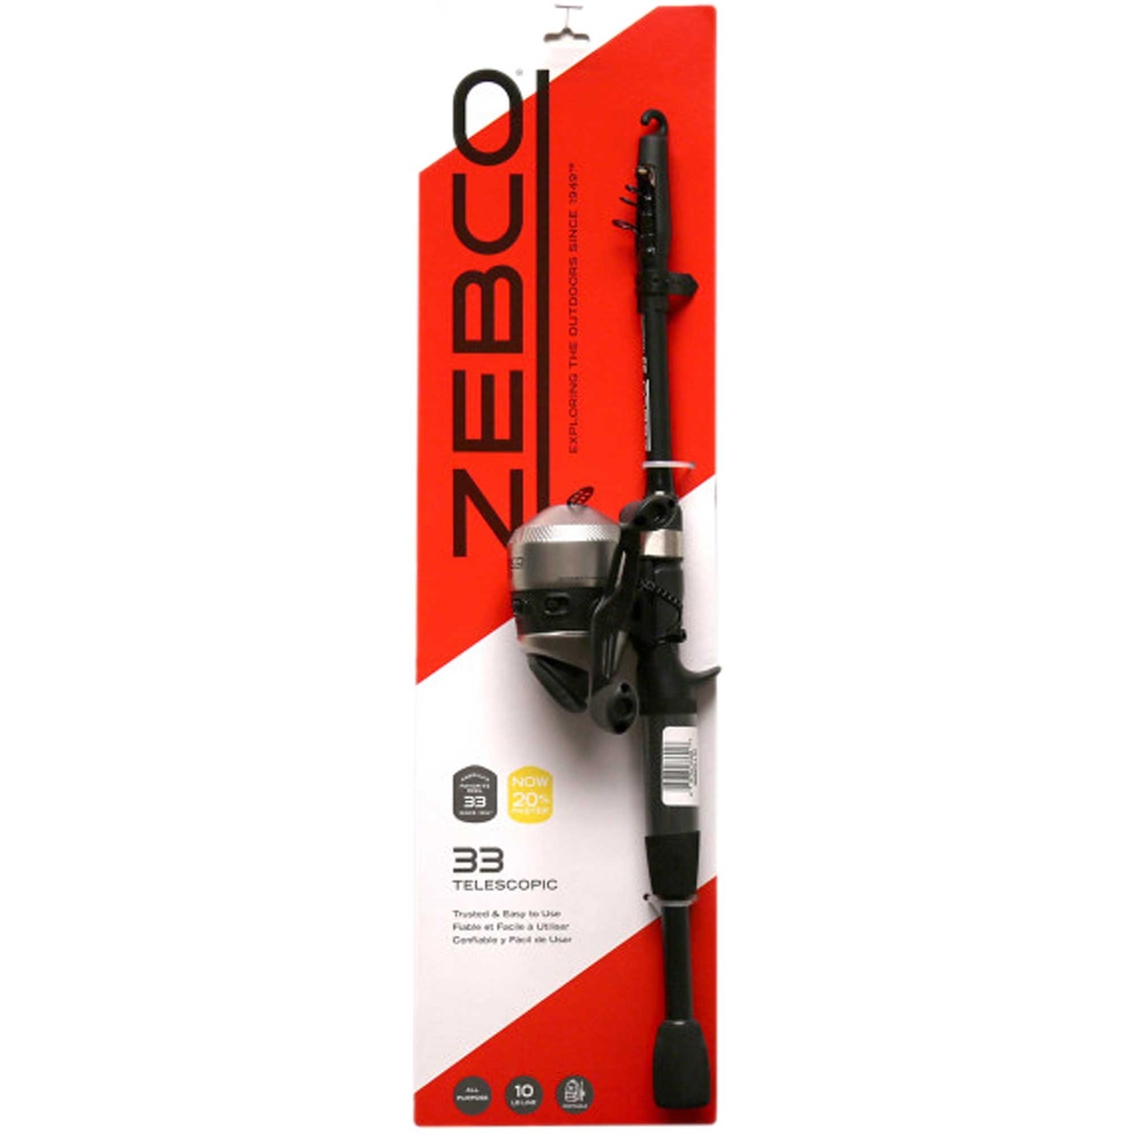 Zebco Telecast Fishing Rod and Reel - Image 8 of 8